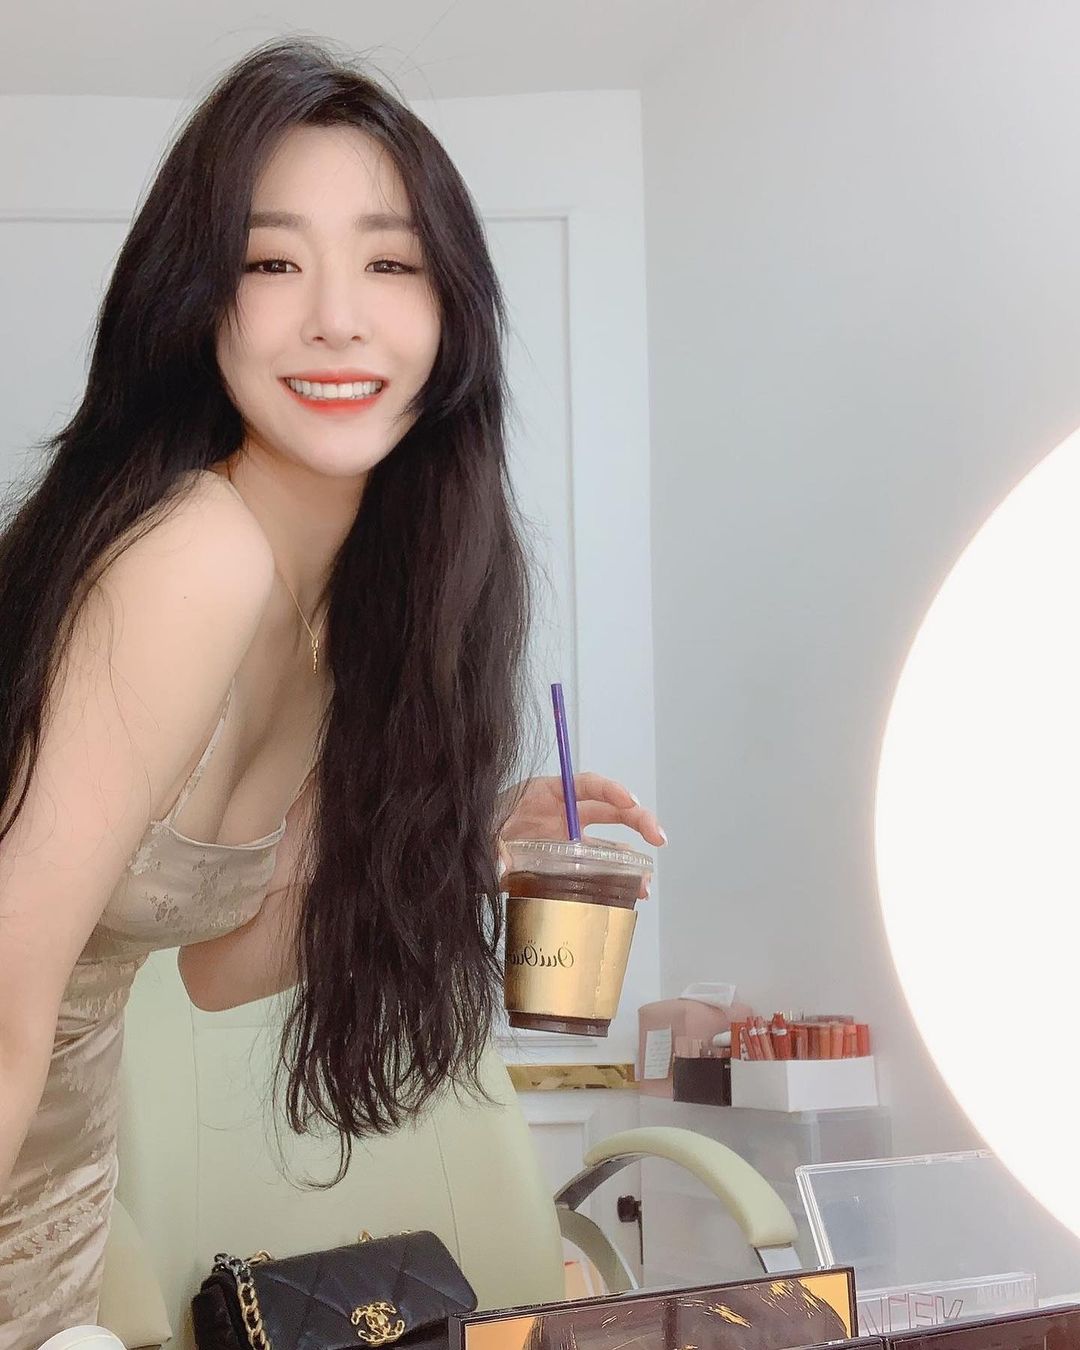 Tiffany, the perfect visual you want to see in the mirror every day